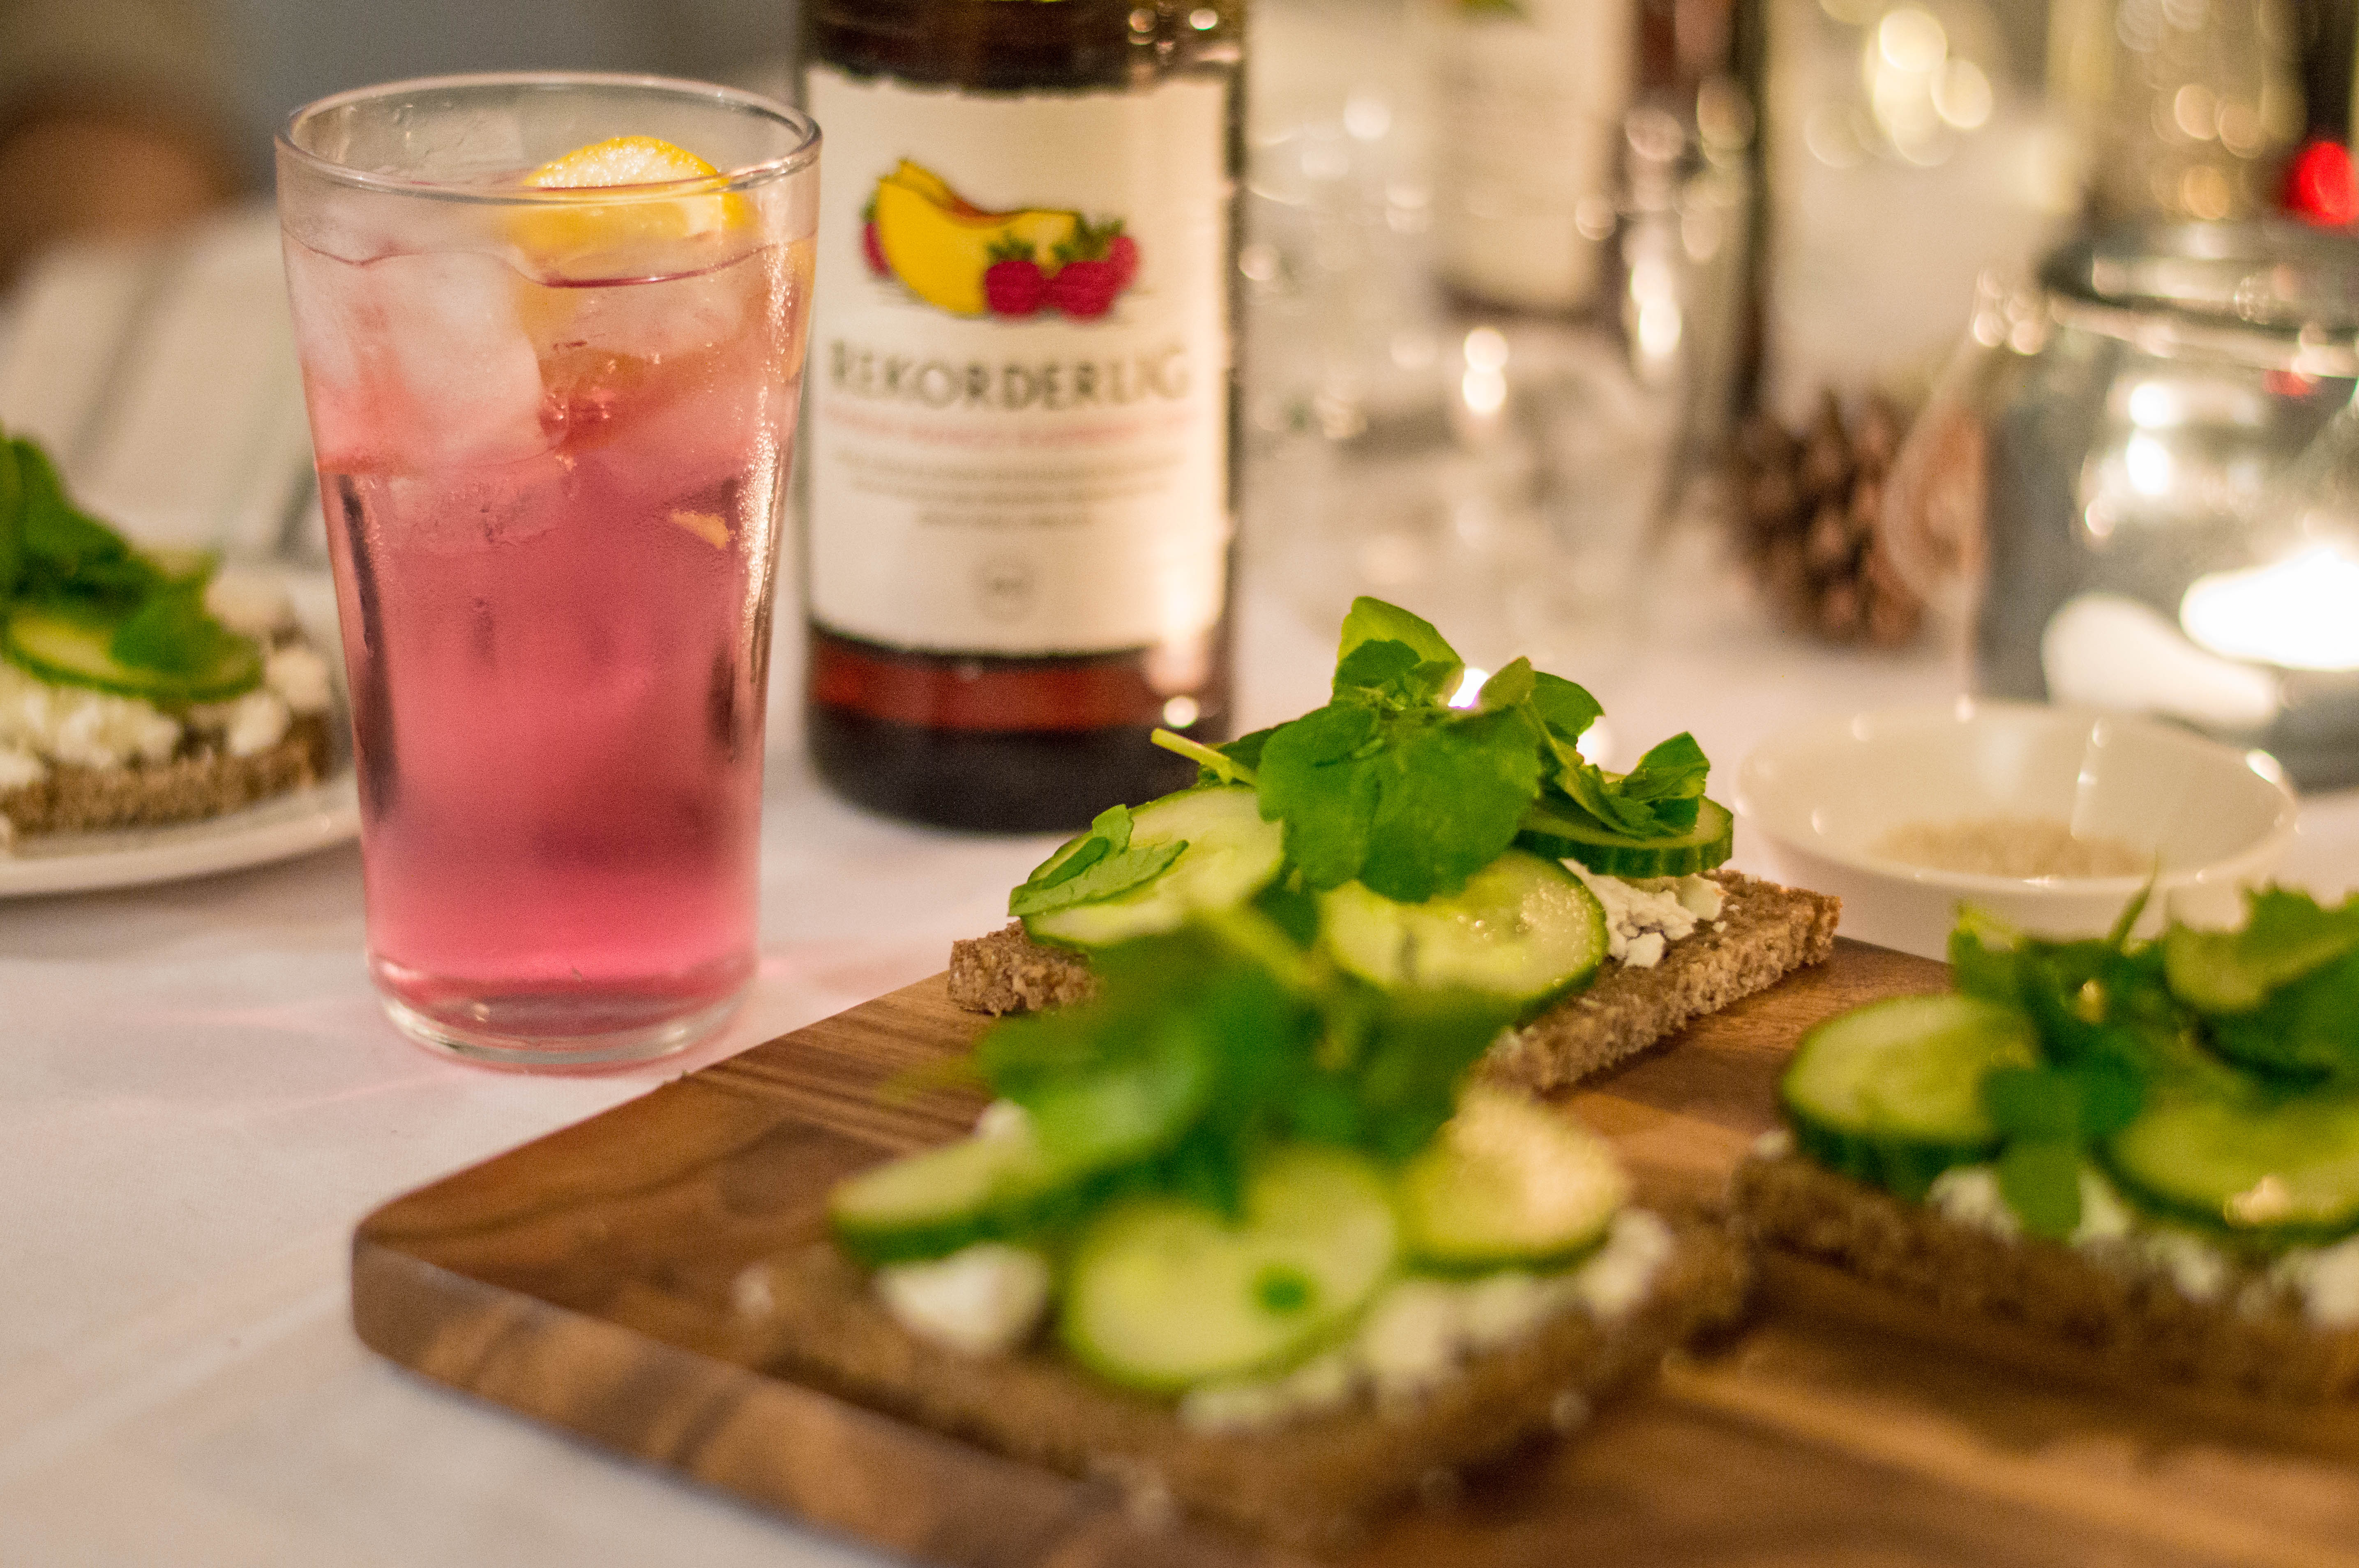 A Swedish-Themed Dinner Party with Rekorderlig